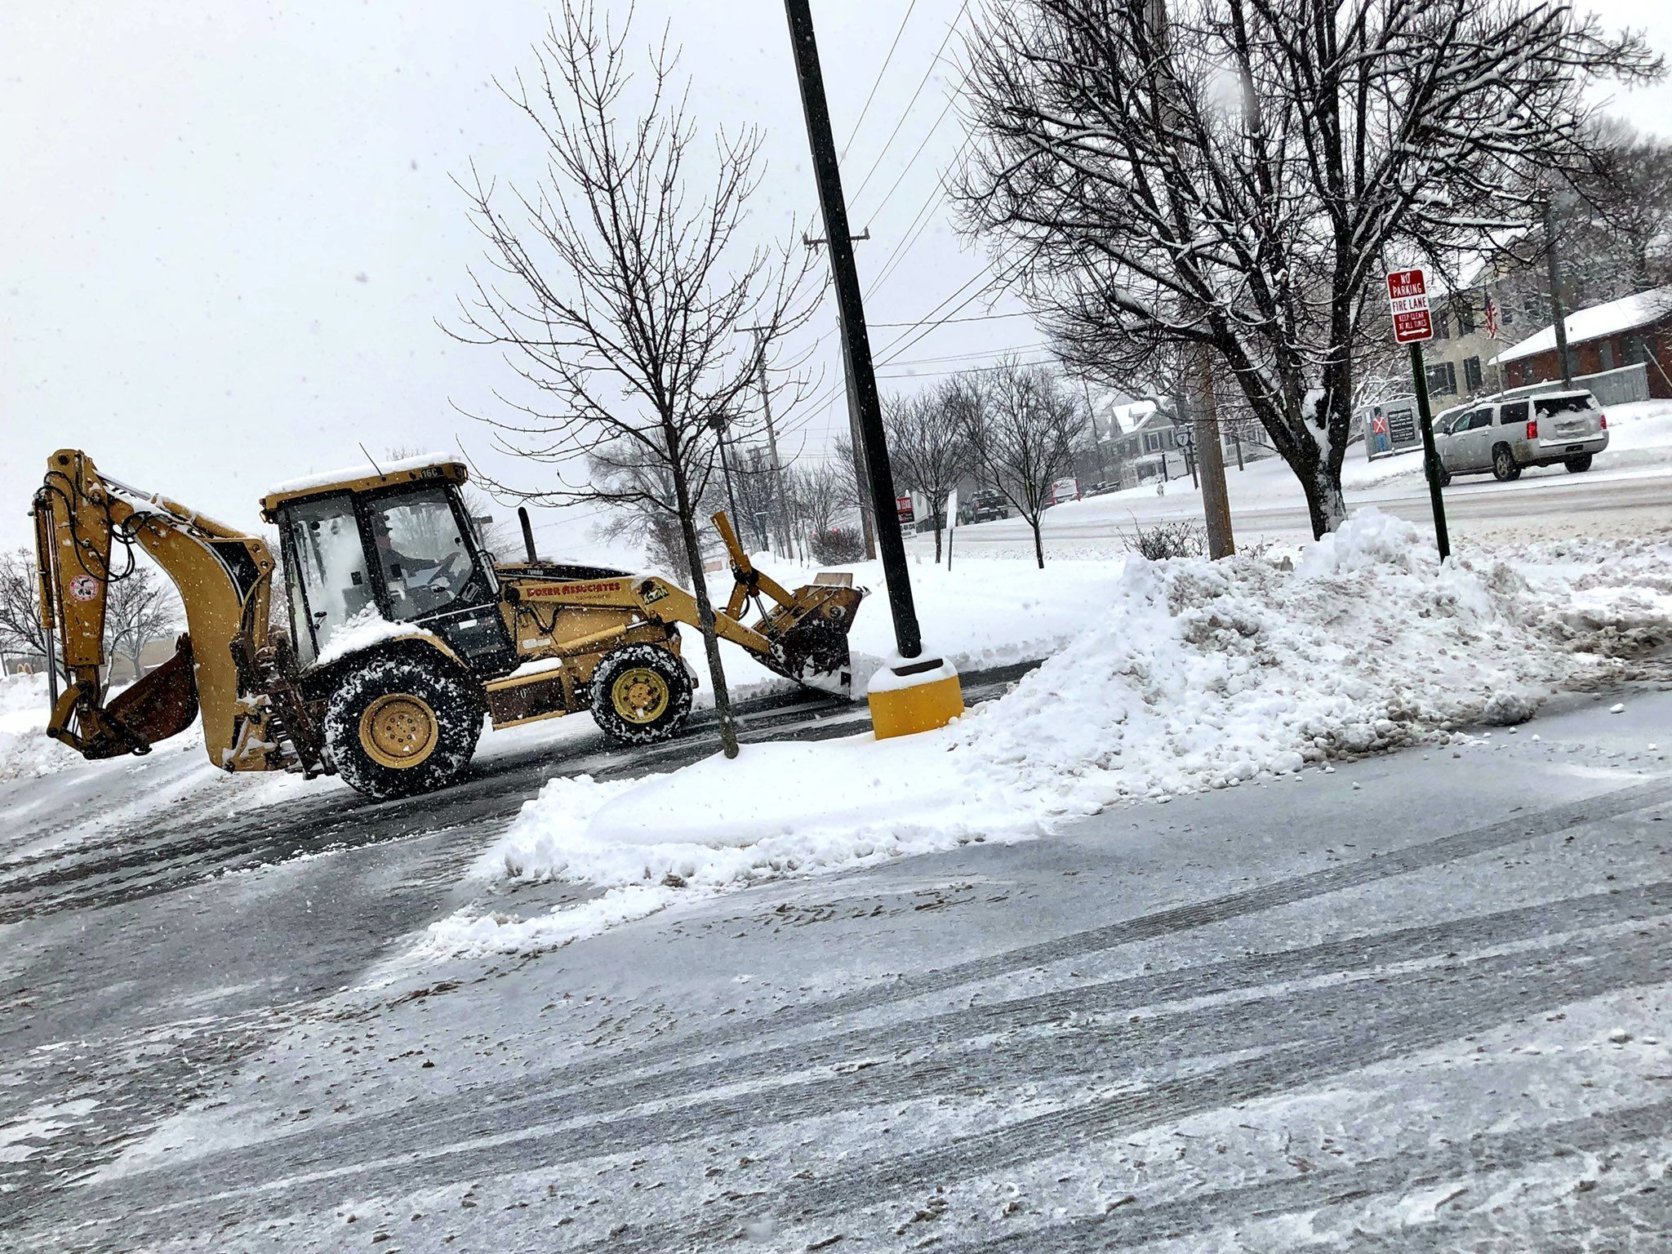 A backhoe begins the messy task of cleaning up the snow in Purcellville. (WTOP/Neal Augenstein)